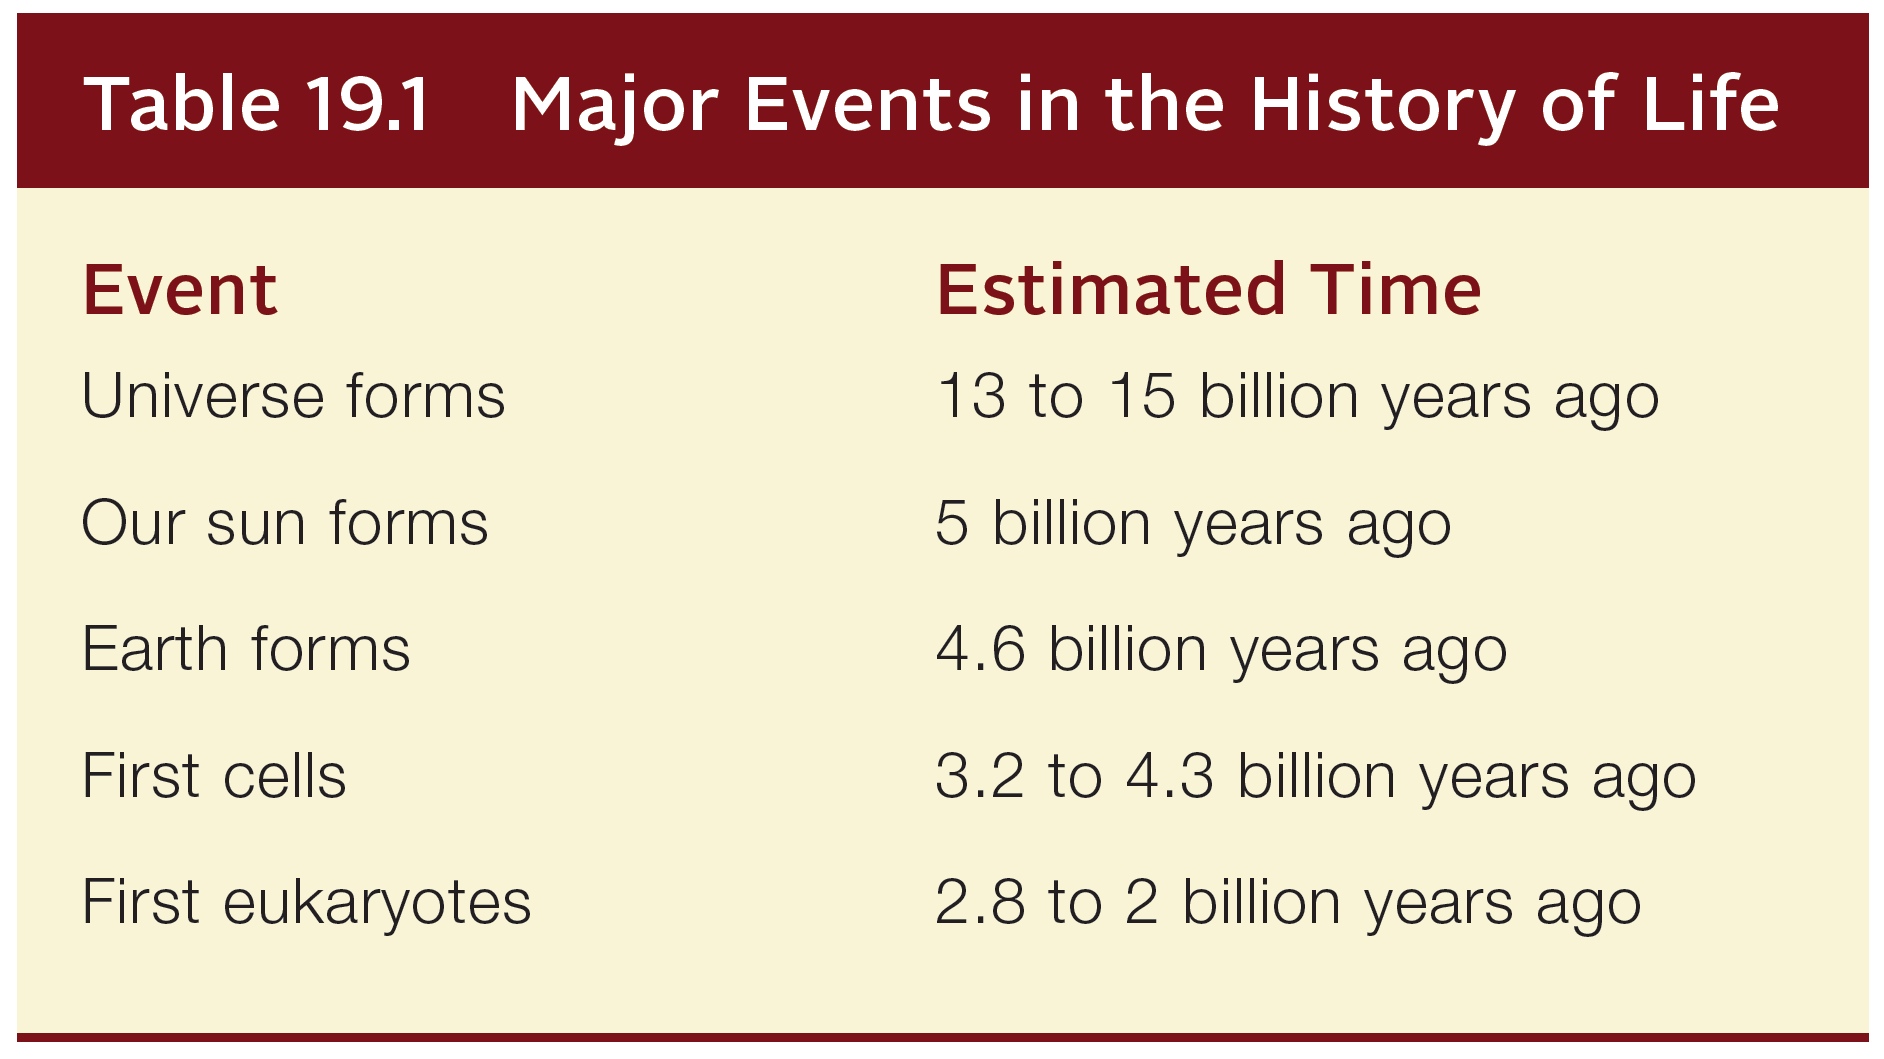 Major Events in the History of Life